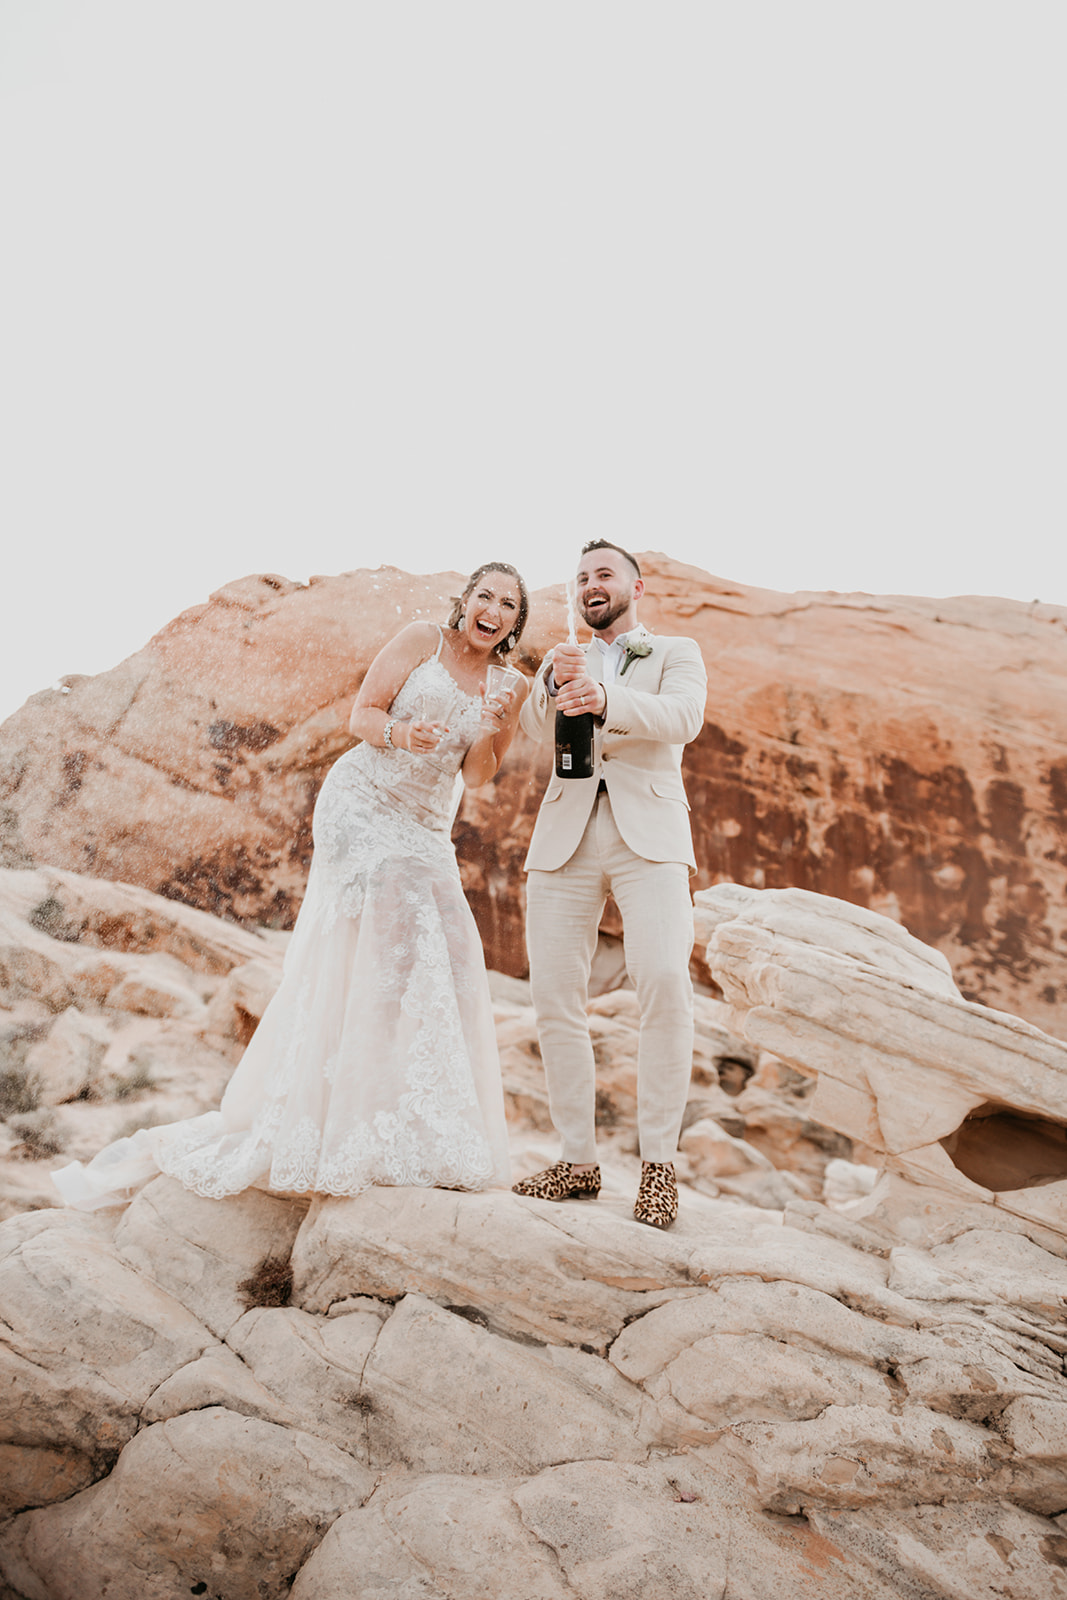 Couple candidly smiling as they pop open a bottle of champagne during elopement coordinated by Elopement Las Vegas